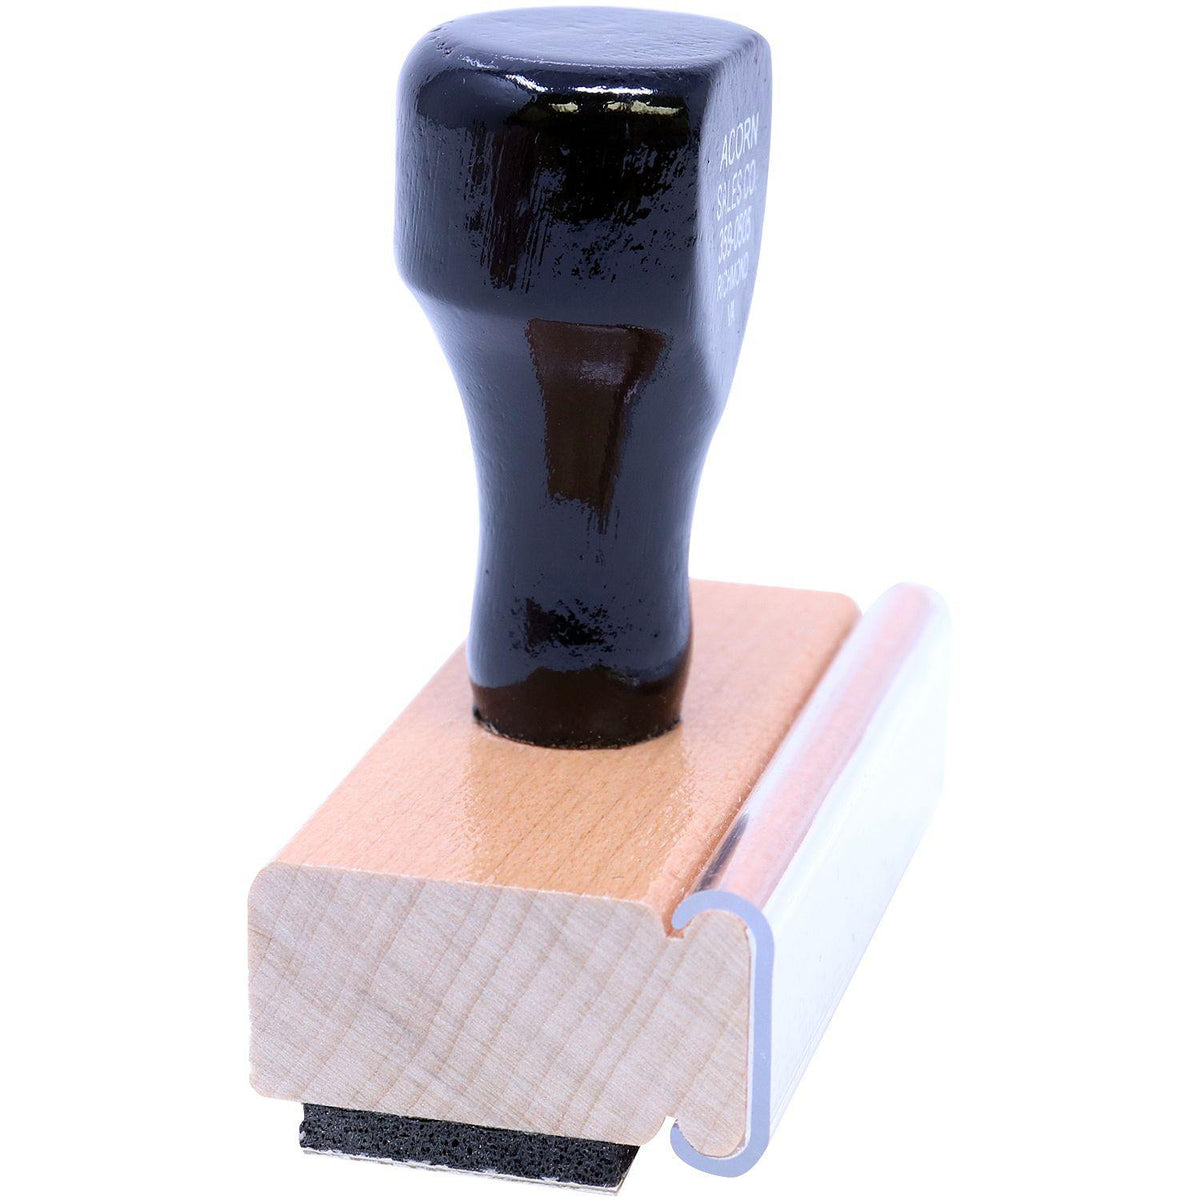 Side View of Large Parcel Post Rubber Stamp at an Angle